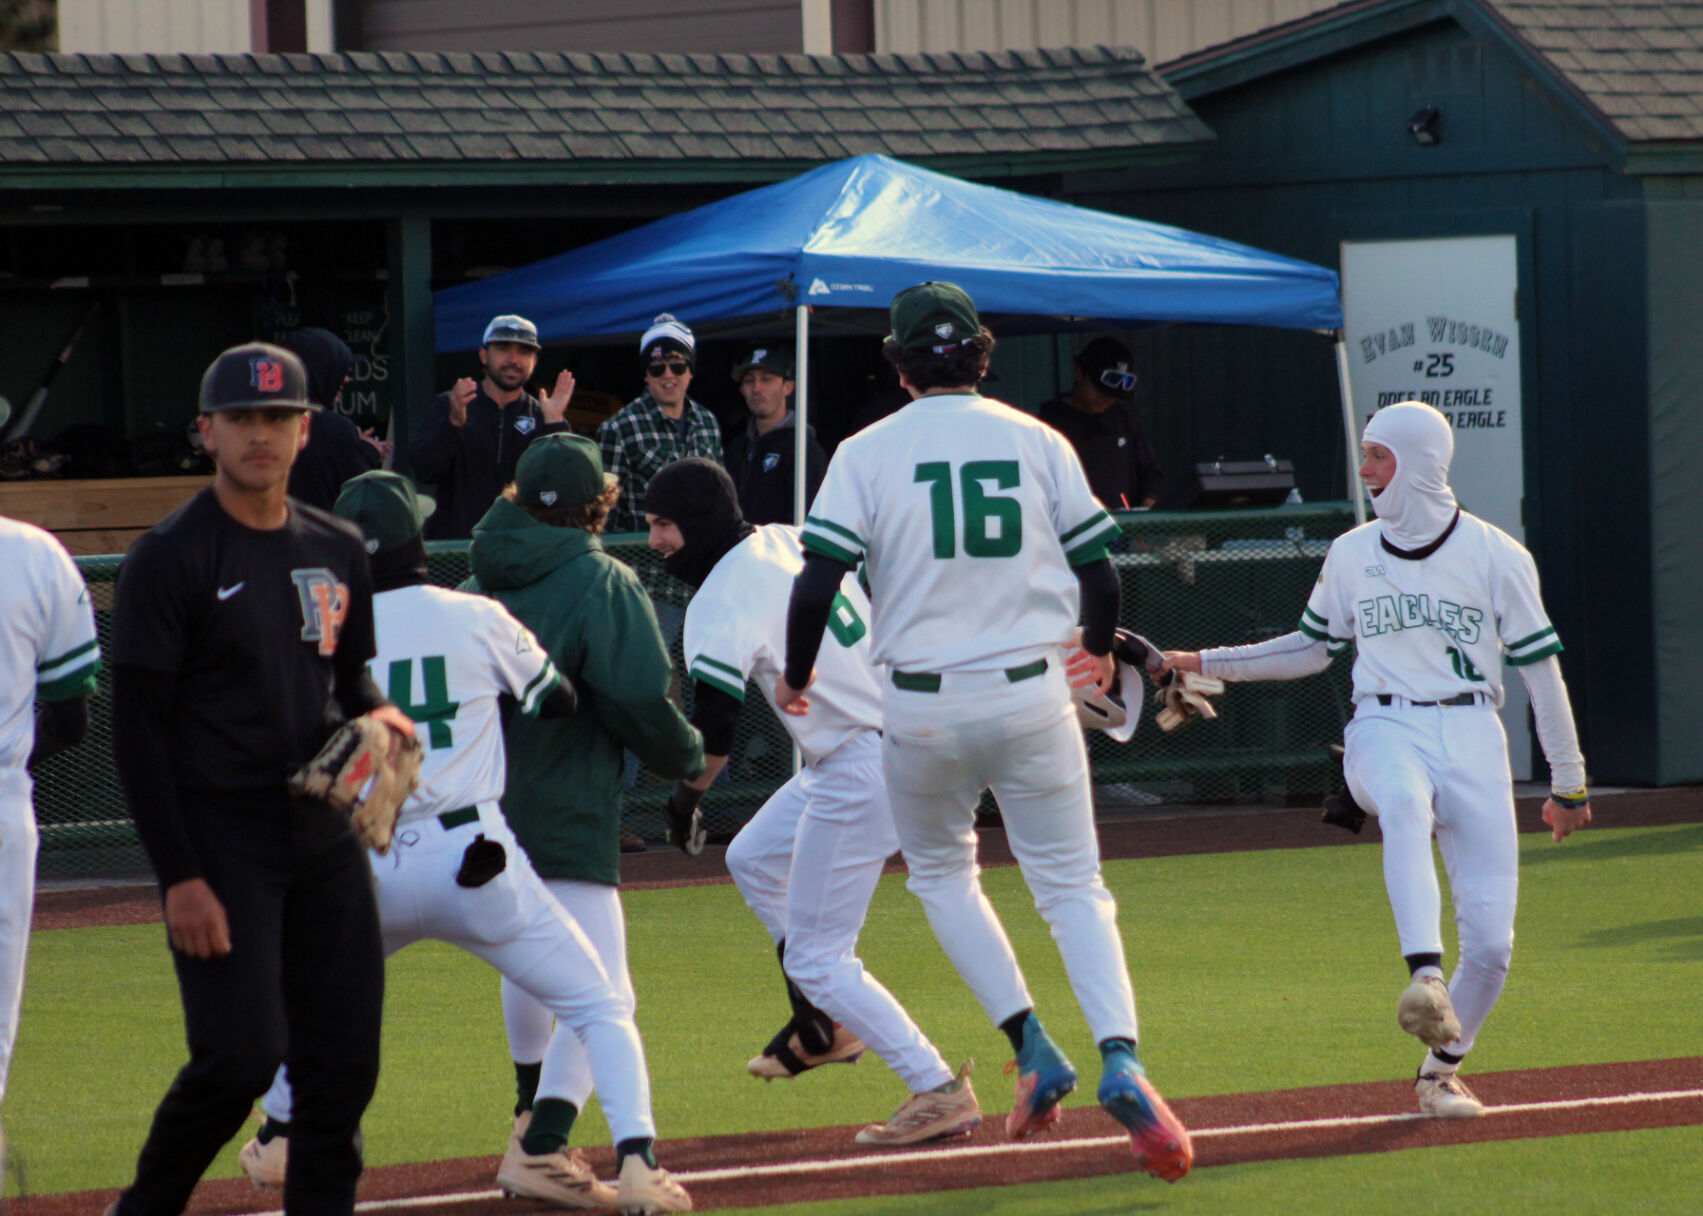 Flagstaff High Eagles secure dramatic win against Poston Butte to advance in state tourney